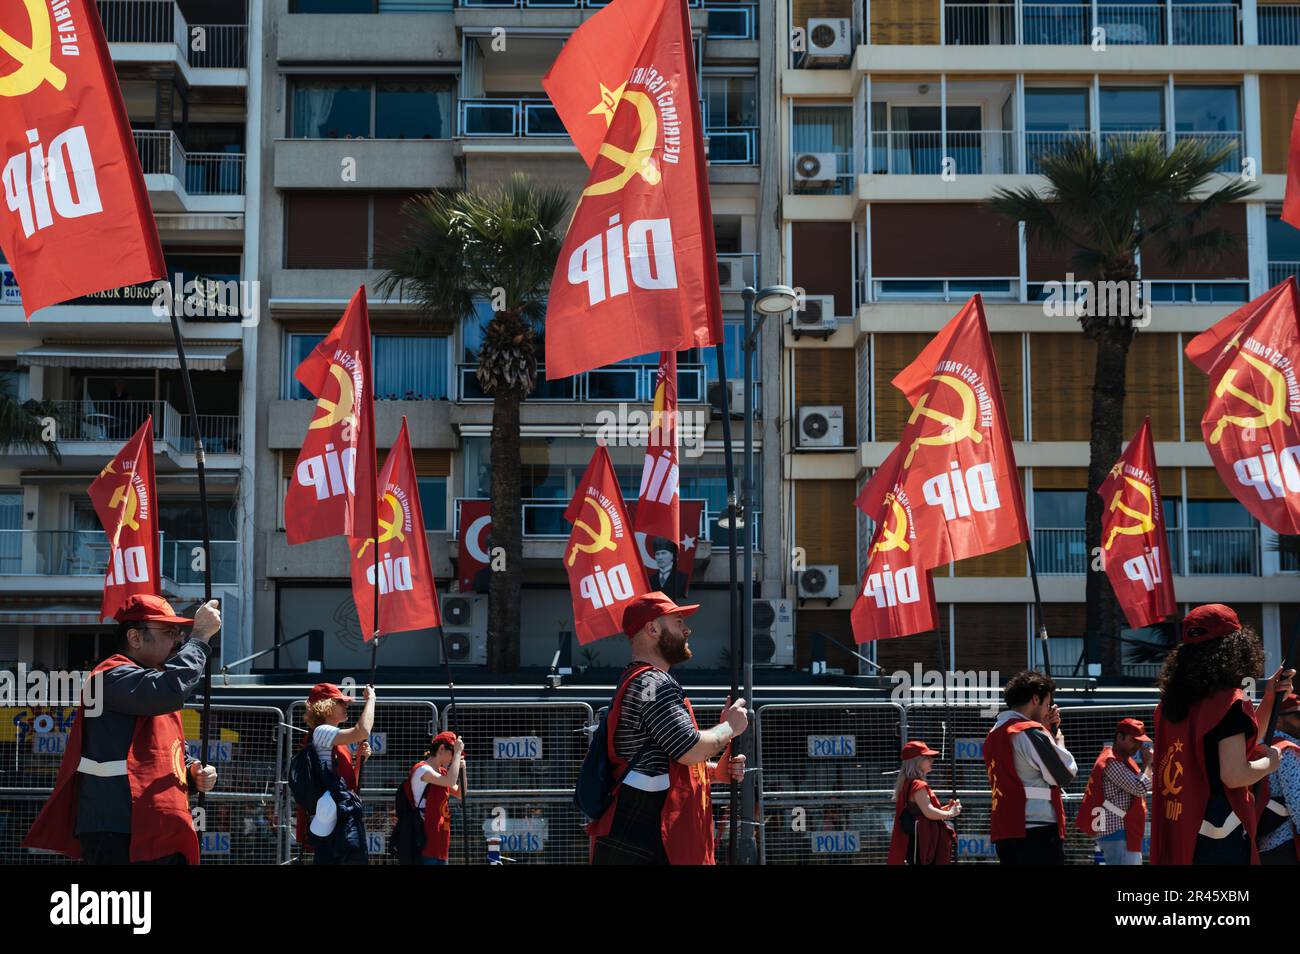 Members of the Communist Party march on the street. Members of the Unions, civil associations, supporters of the opposition parties and the pro-Kurdish parties HPD and Yesil Sol Party, gathered at Gundogdu Square in Izmir to celebrate the International Workers' Day on May 1st, and the country is set to vote on May 14th, people attending the gathering were also expressing their political support for the opposition parties. Stock Photo